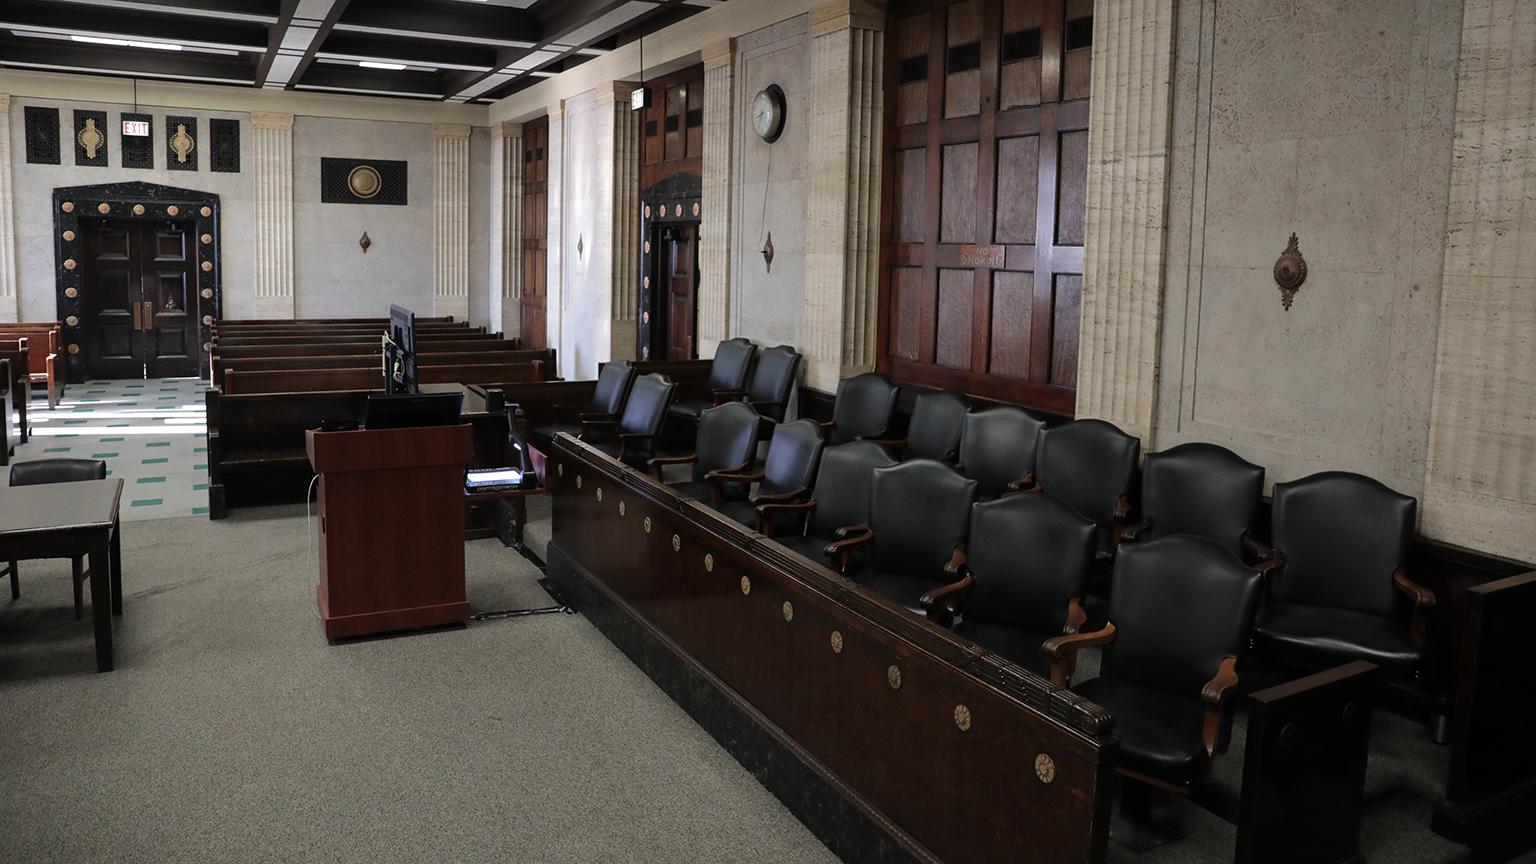 Empty jury box area readied for members of the jury in the courtroom of Judge Vincent Gaughan at the Leighton Criminal Court Building on Tuesday, Sept. 4, 2018. (Antonio Perez / Pool / Chicago Tribune)